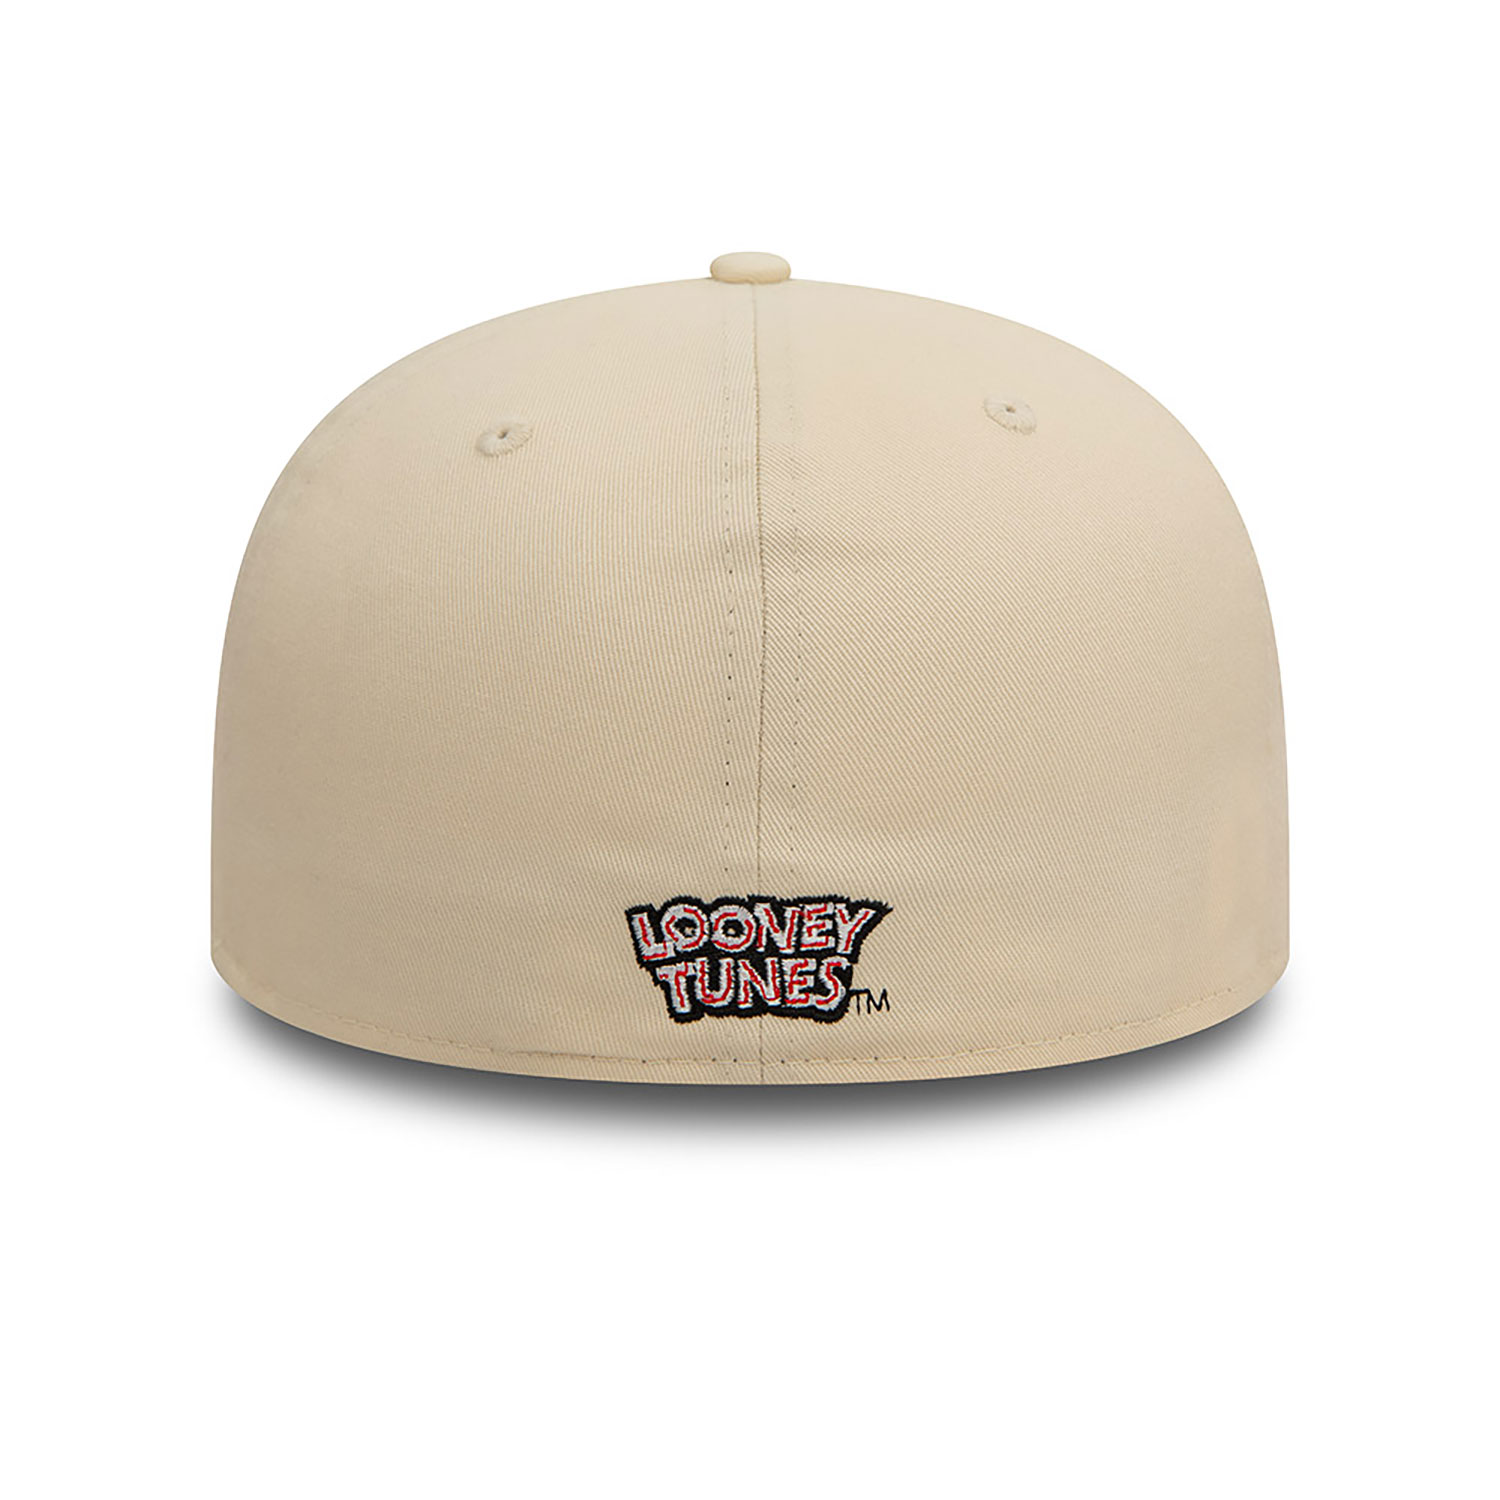 Bugs Bunny Warner Brothers Festive Light Beige 59FIFTY Fitted Cap